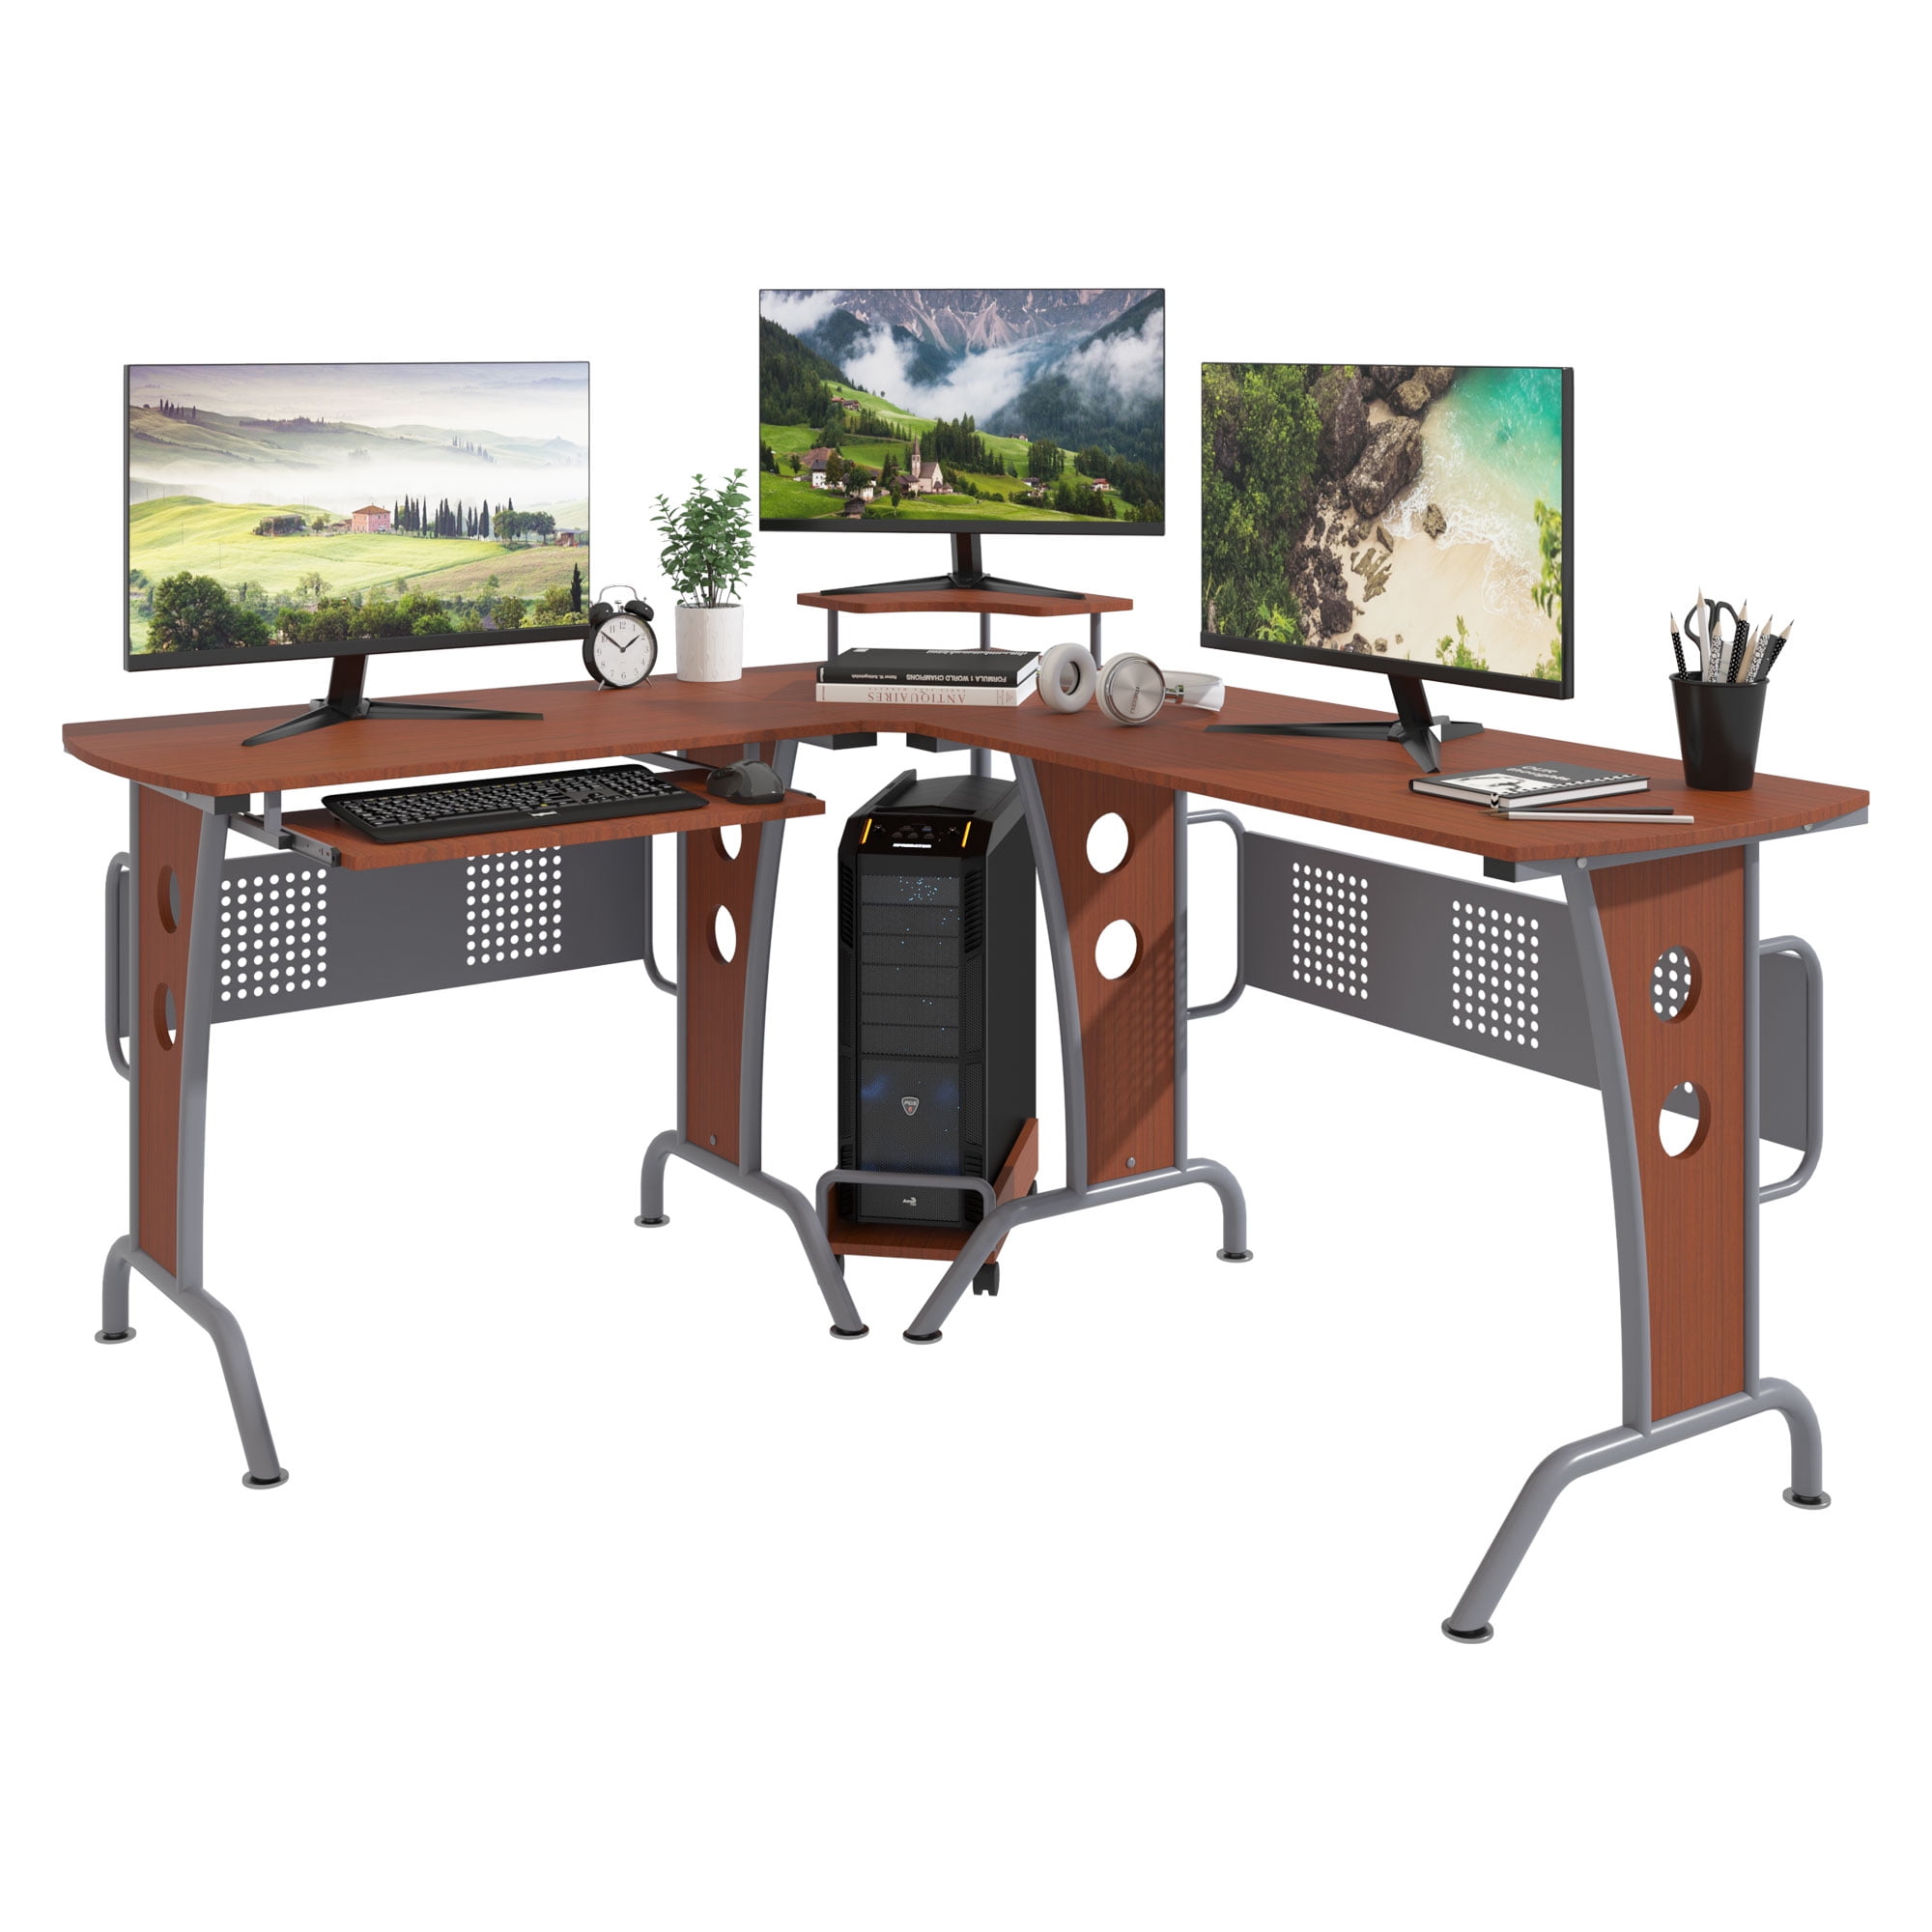 Black HOMCOM L-Shaped Corner Computer Office Desk PC Table Workstation E1 MDF with Keyboard Tray CPU Stand